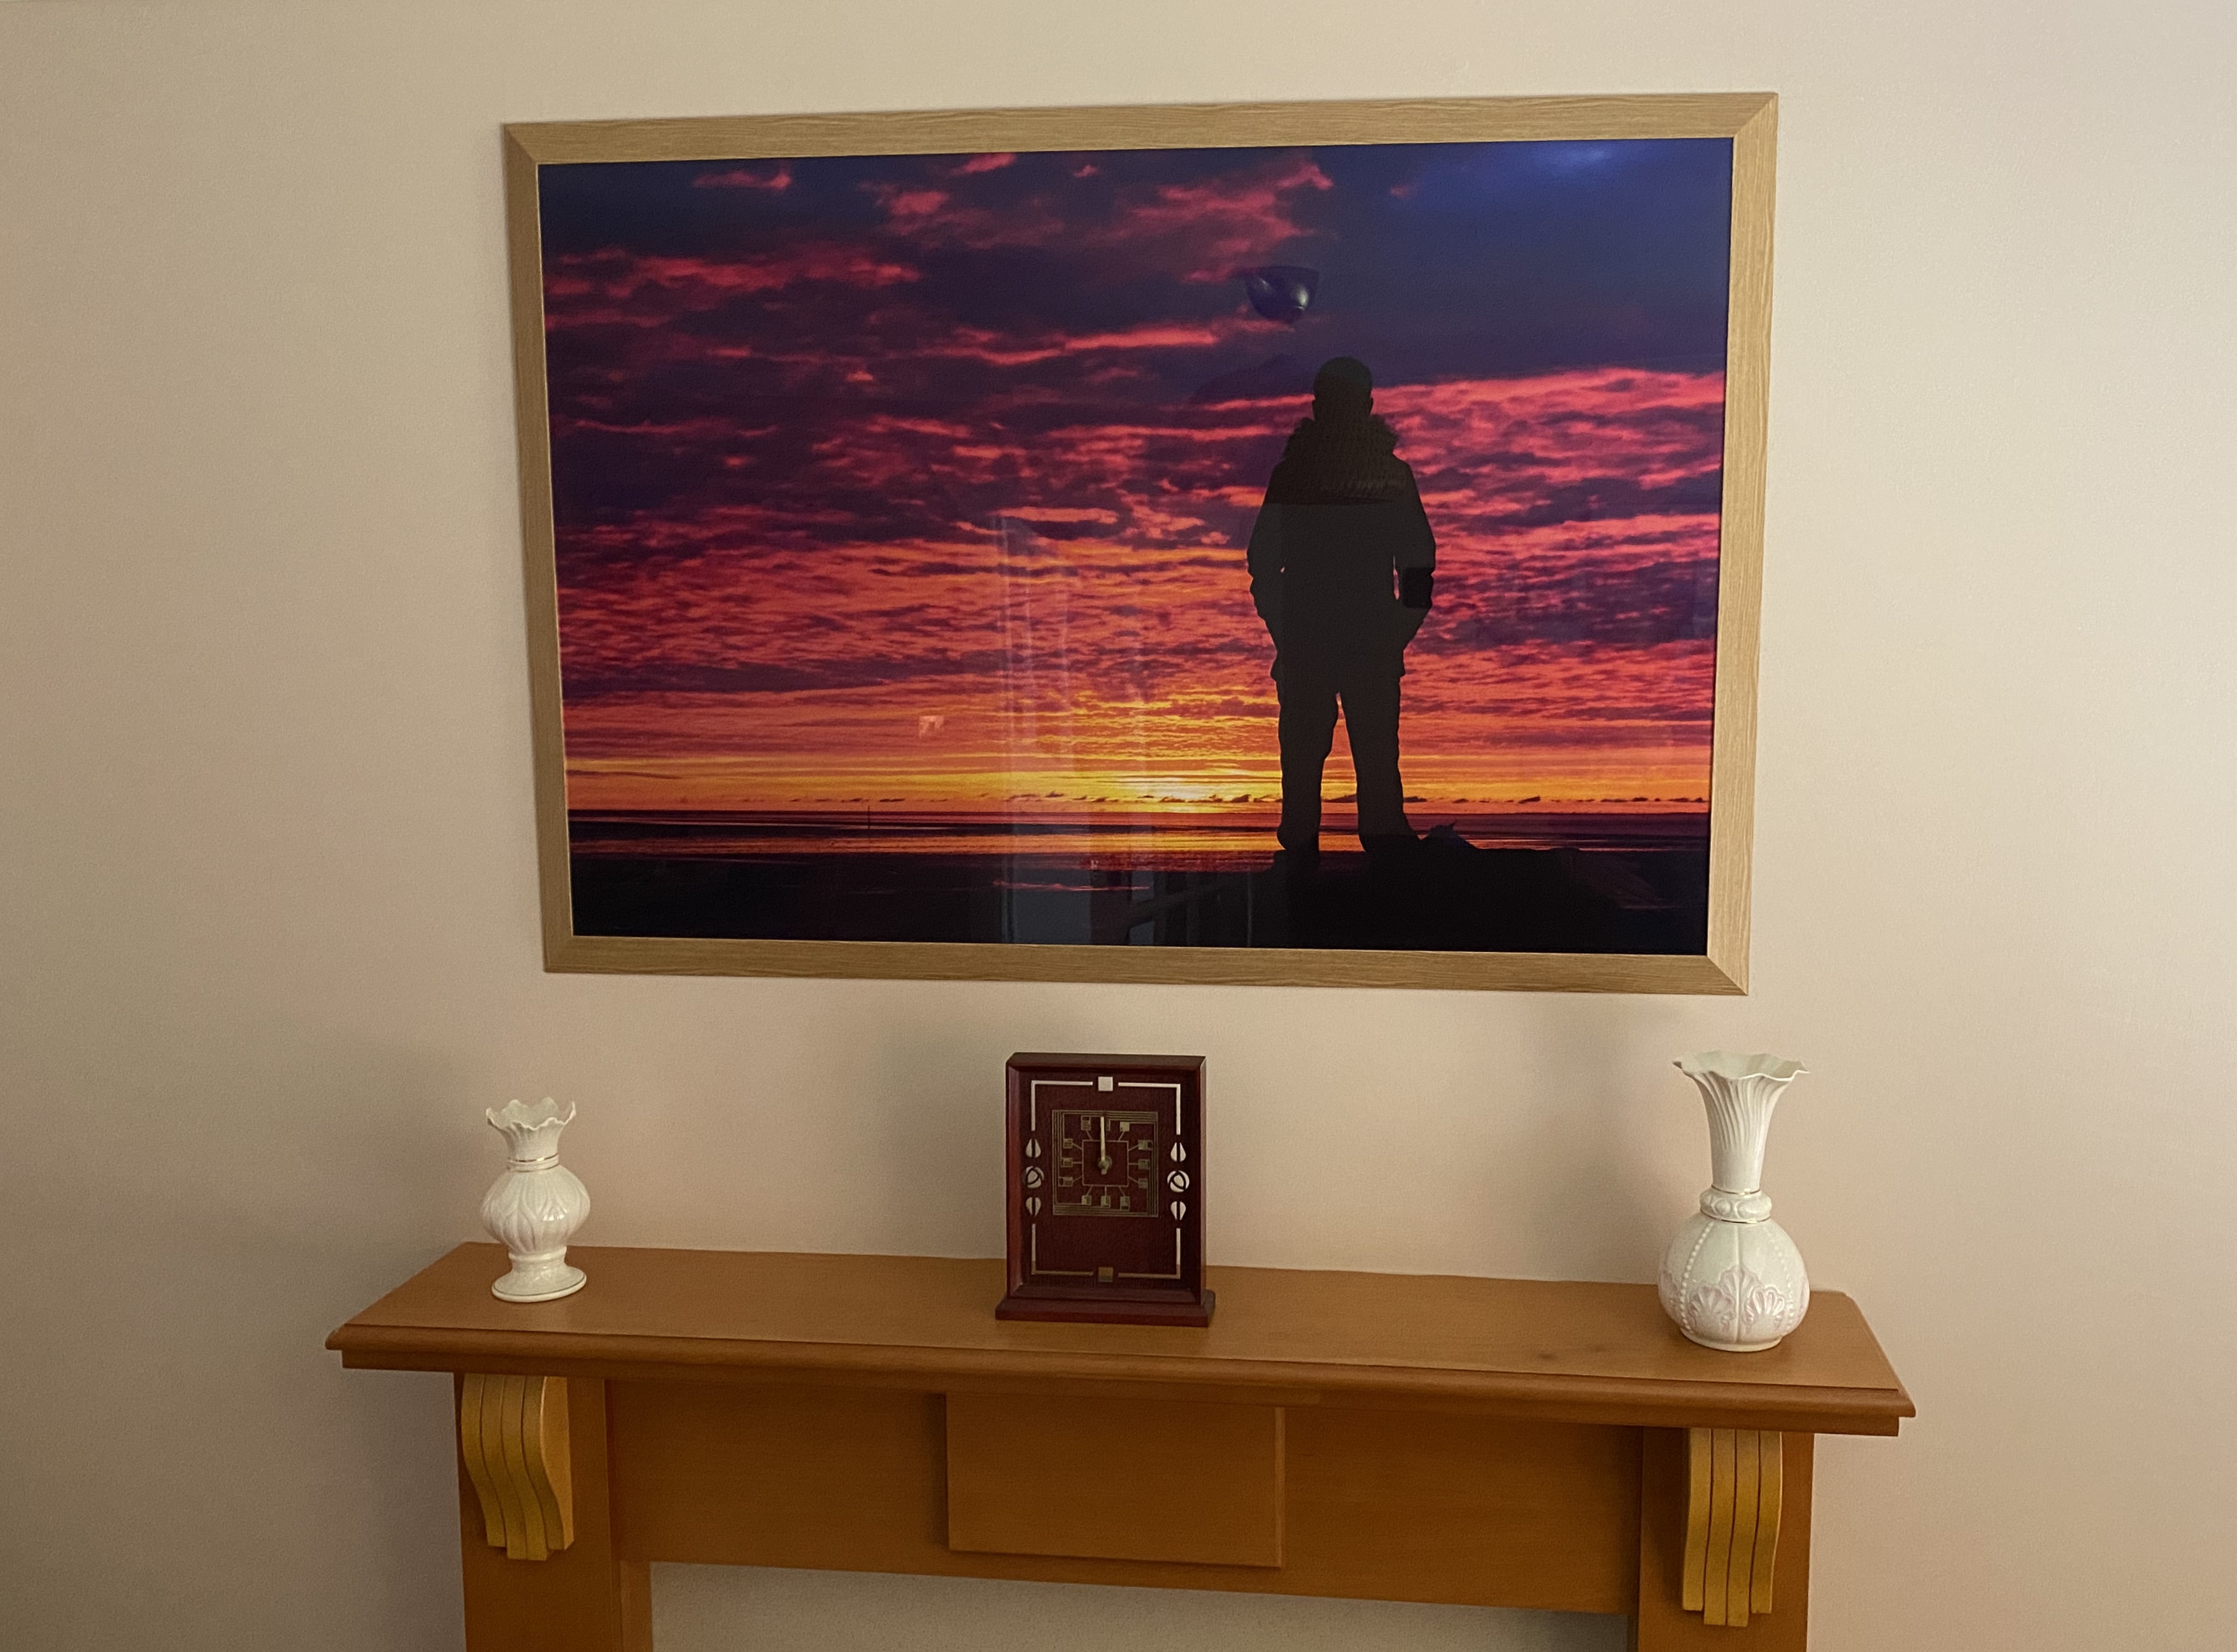 Perspective hanging above a mantelpiece - a glossy image of a silhouette on the sunset.